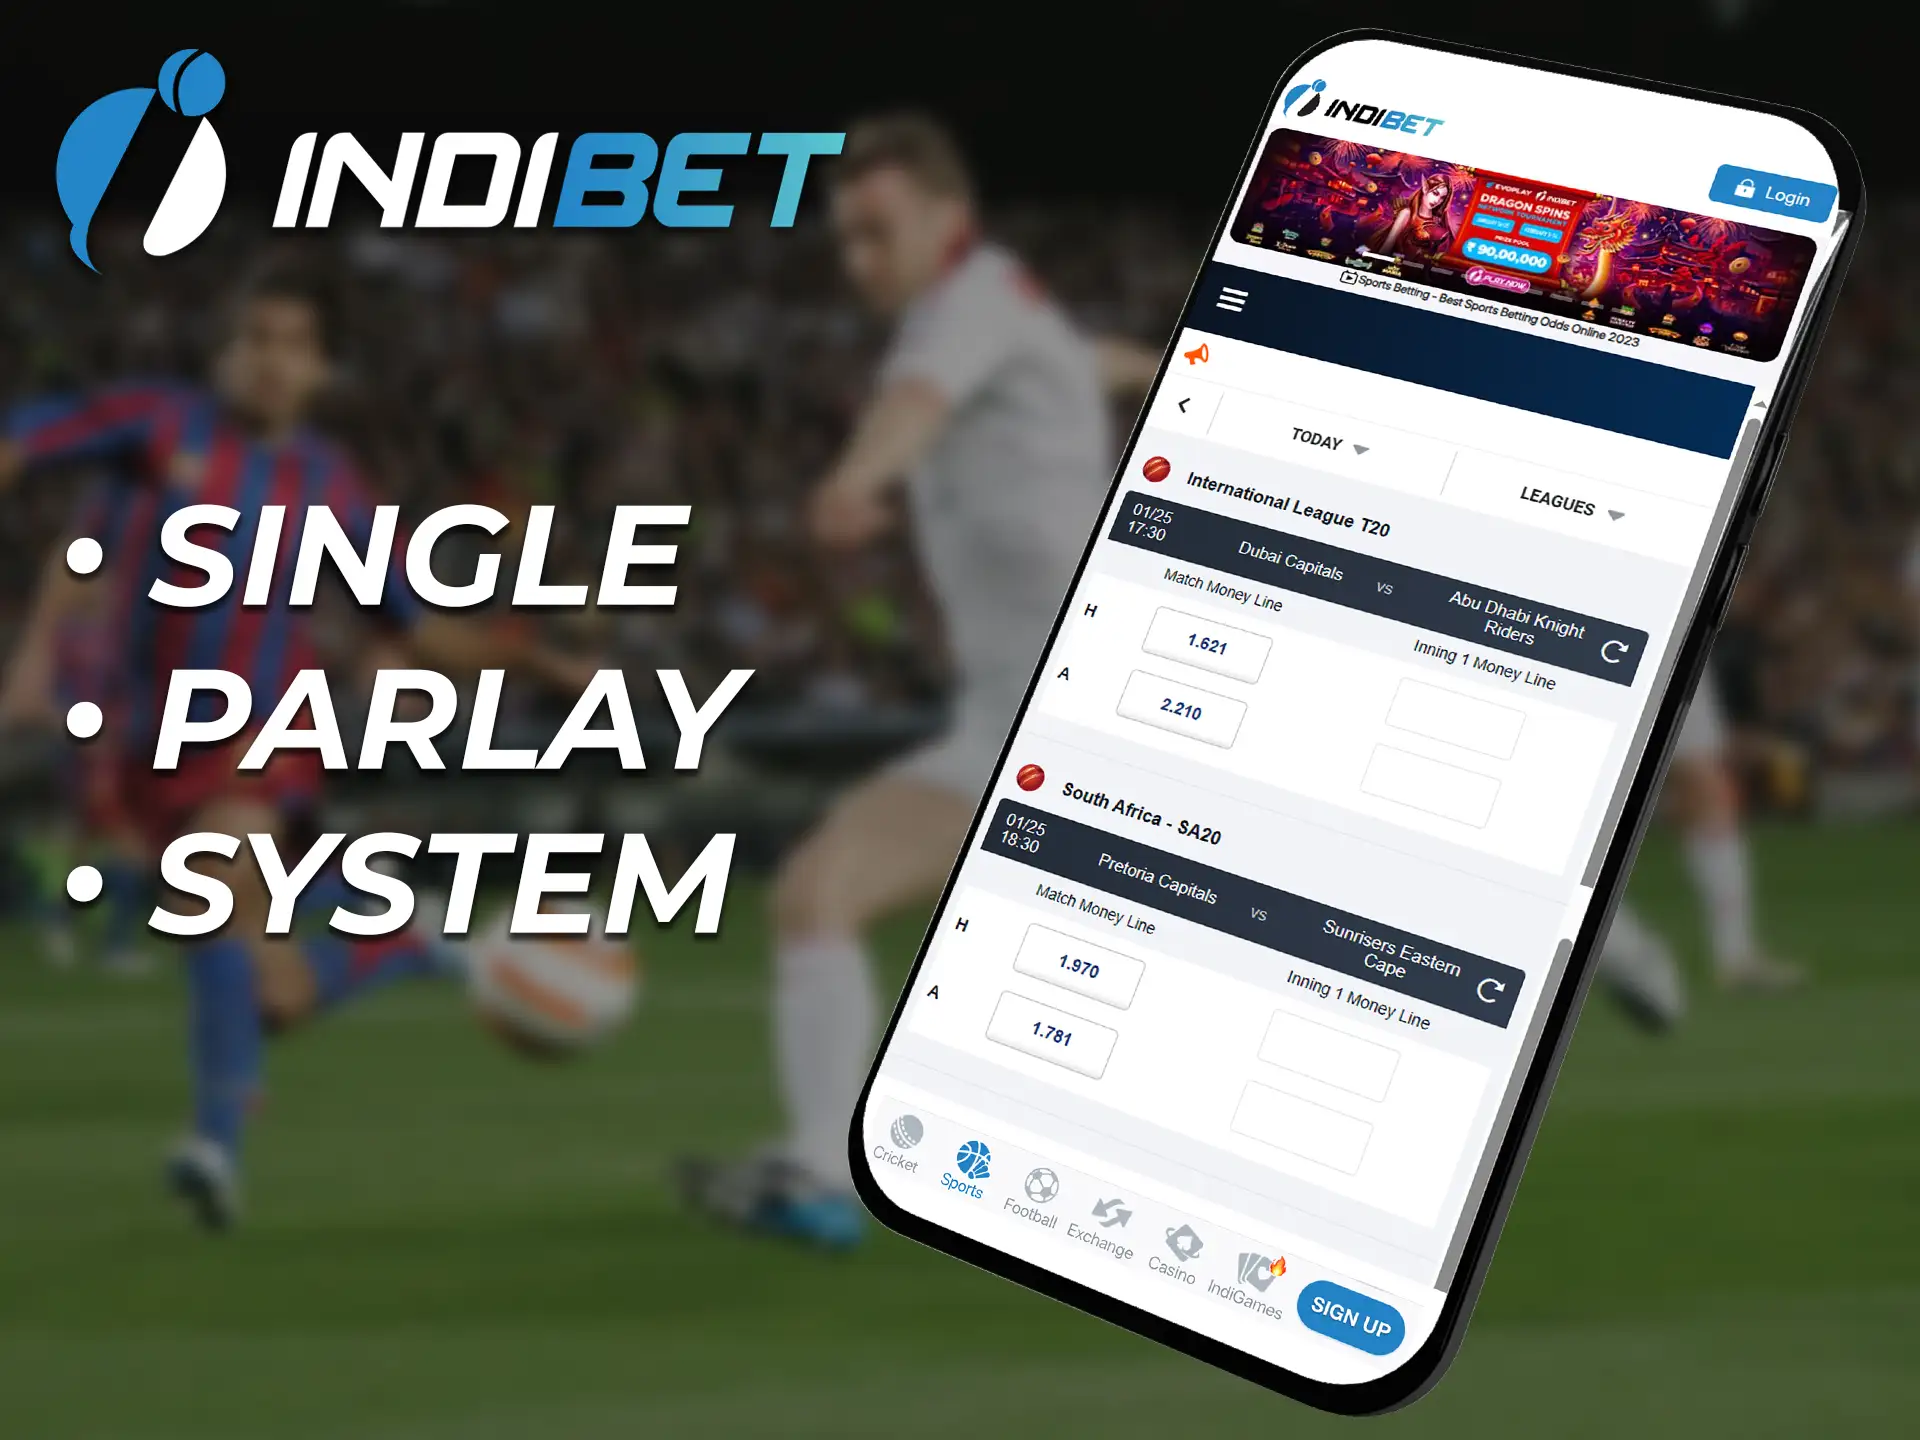 Indibet offers several types of bets.